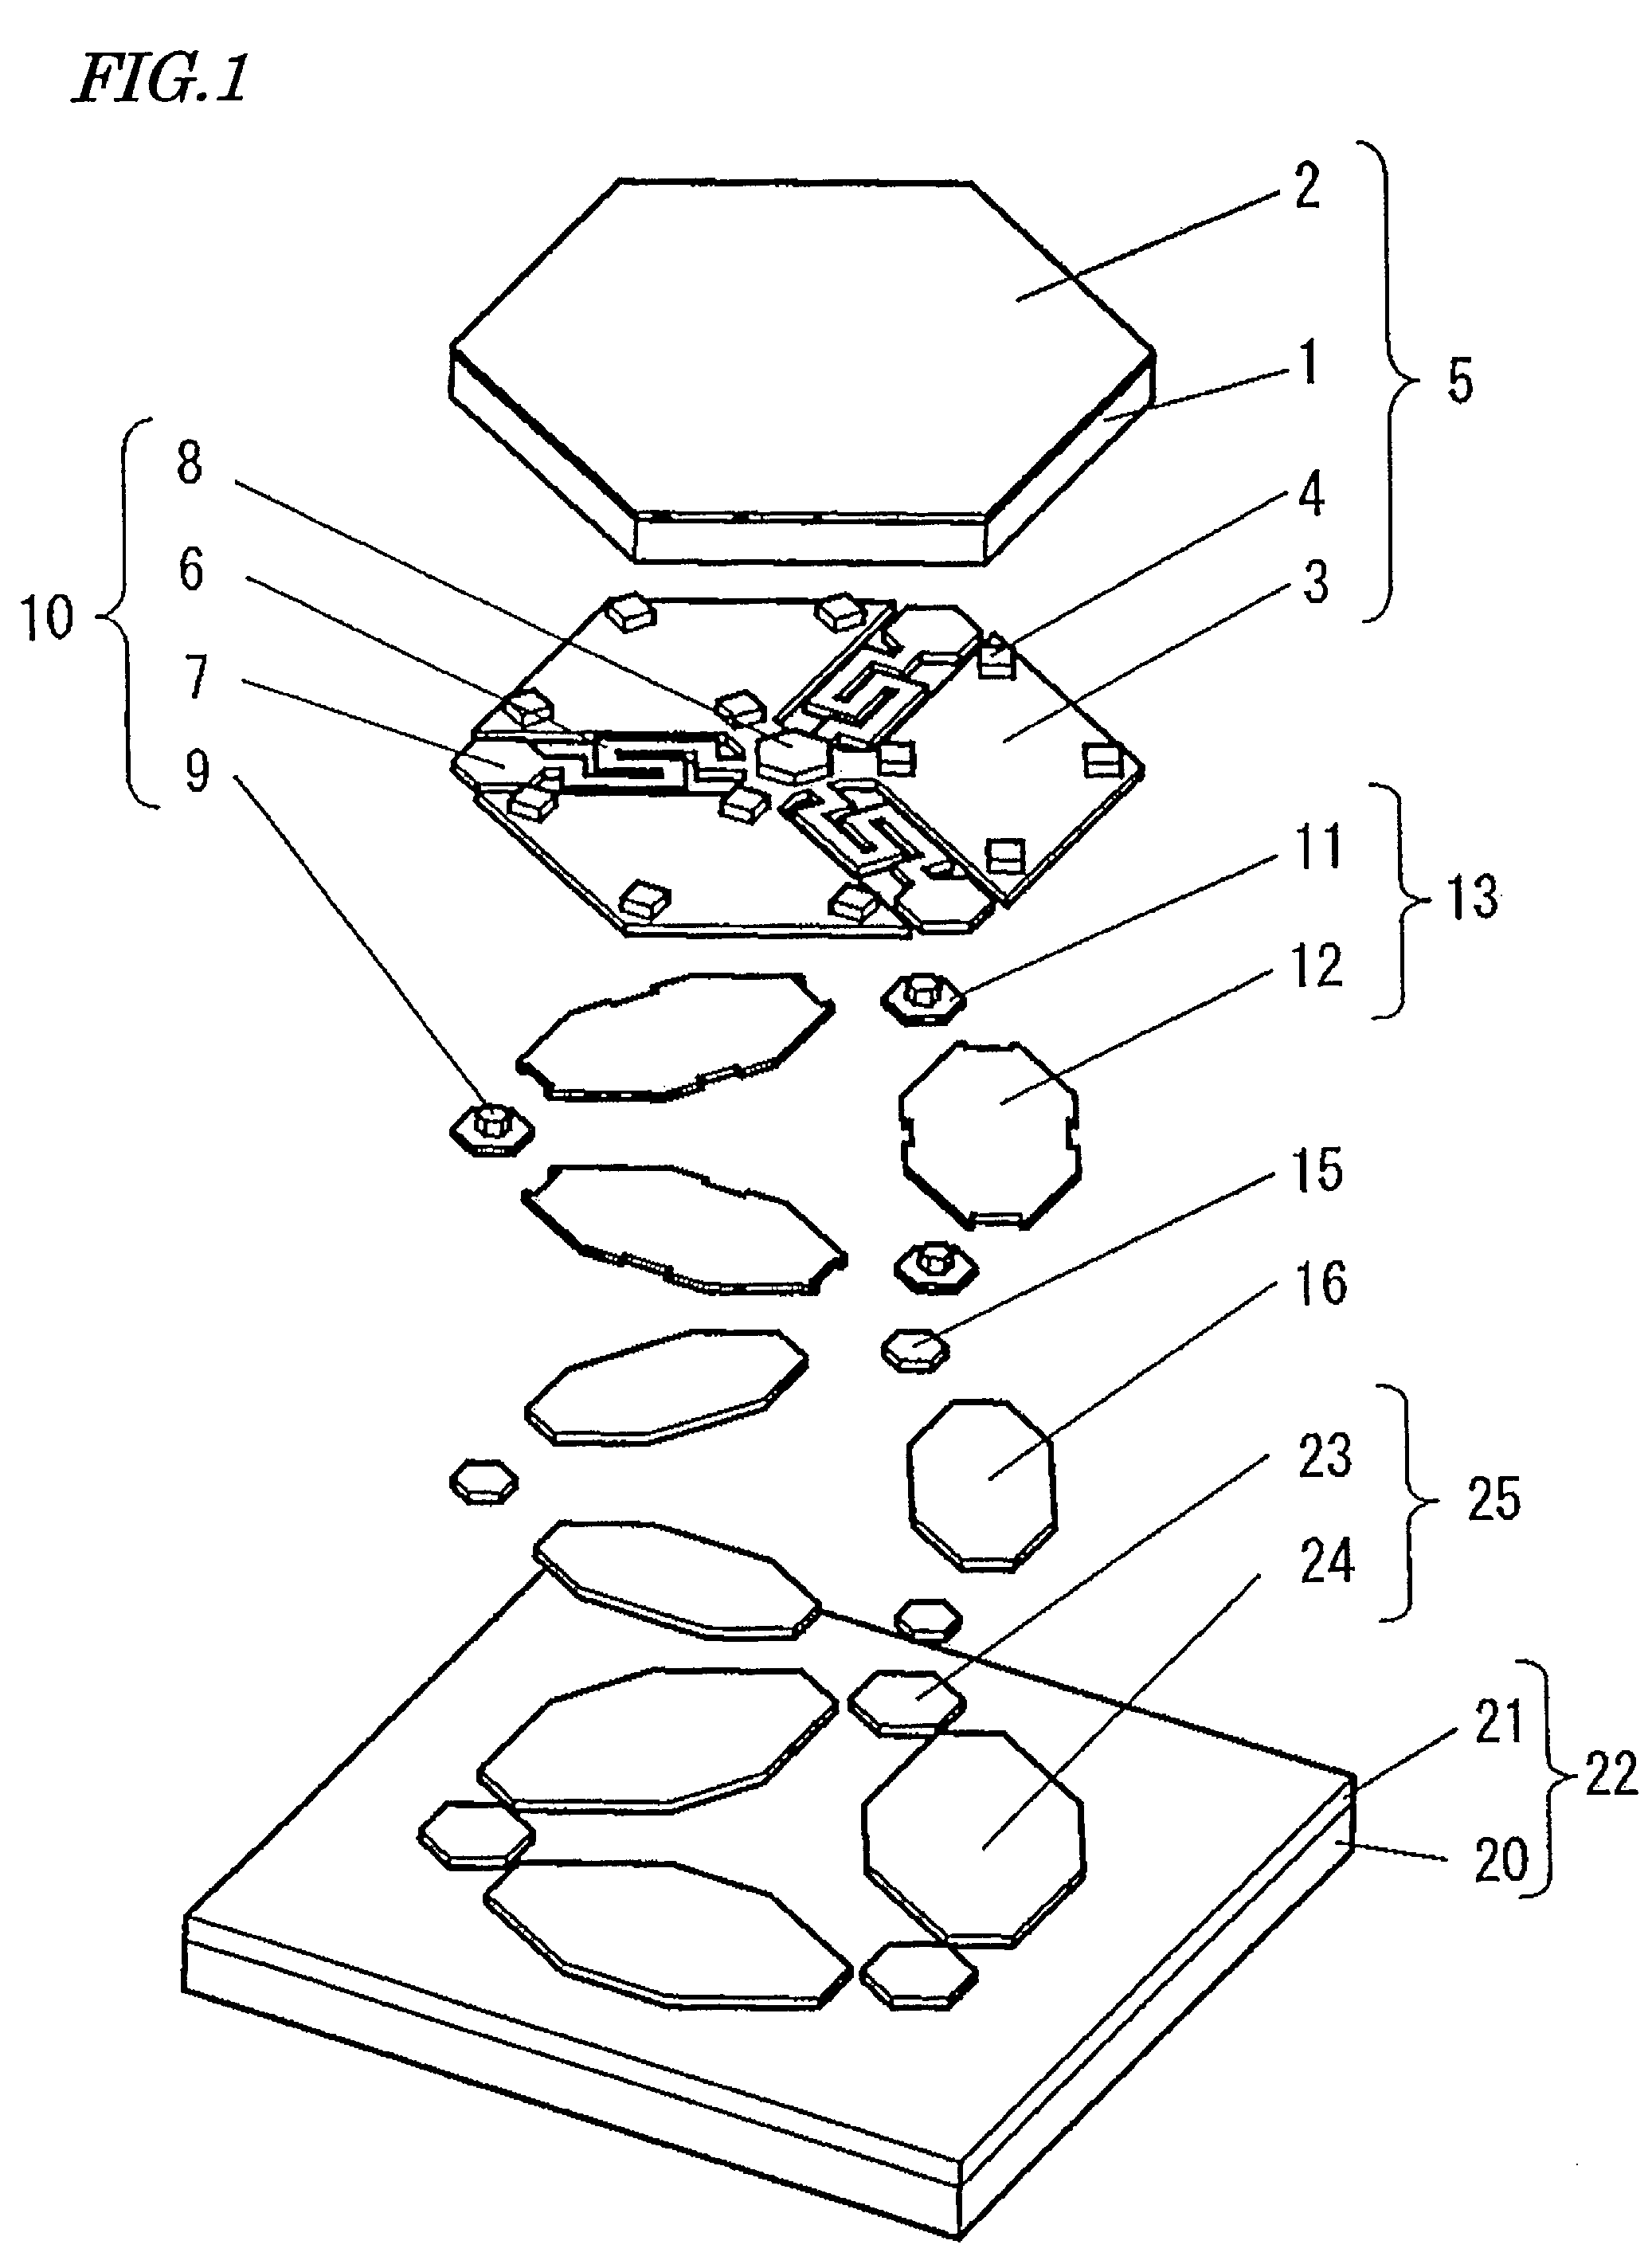 Micromachine structure system and method for manufacturing same